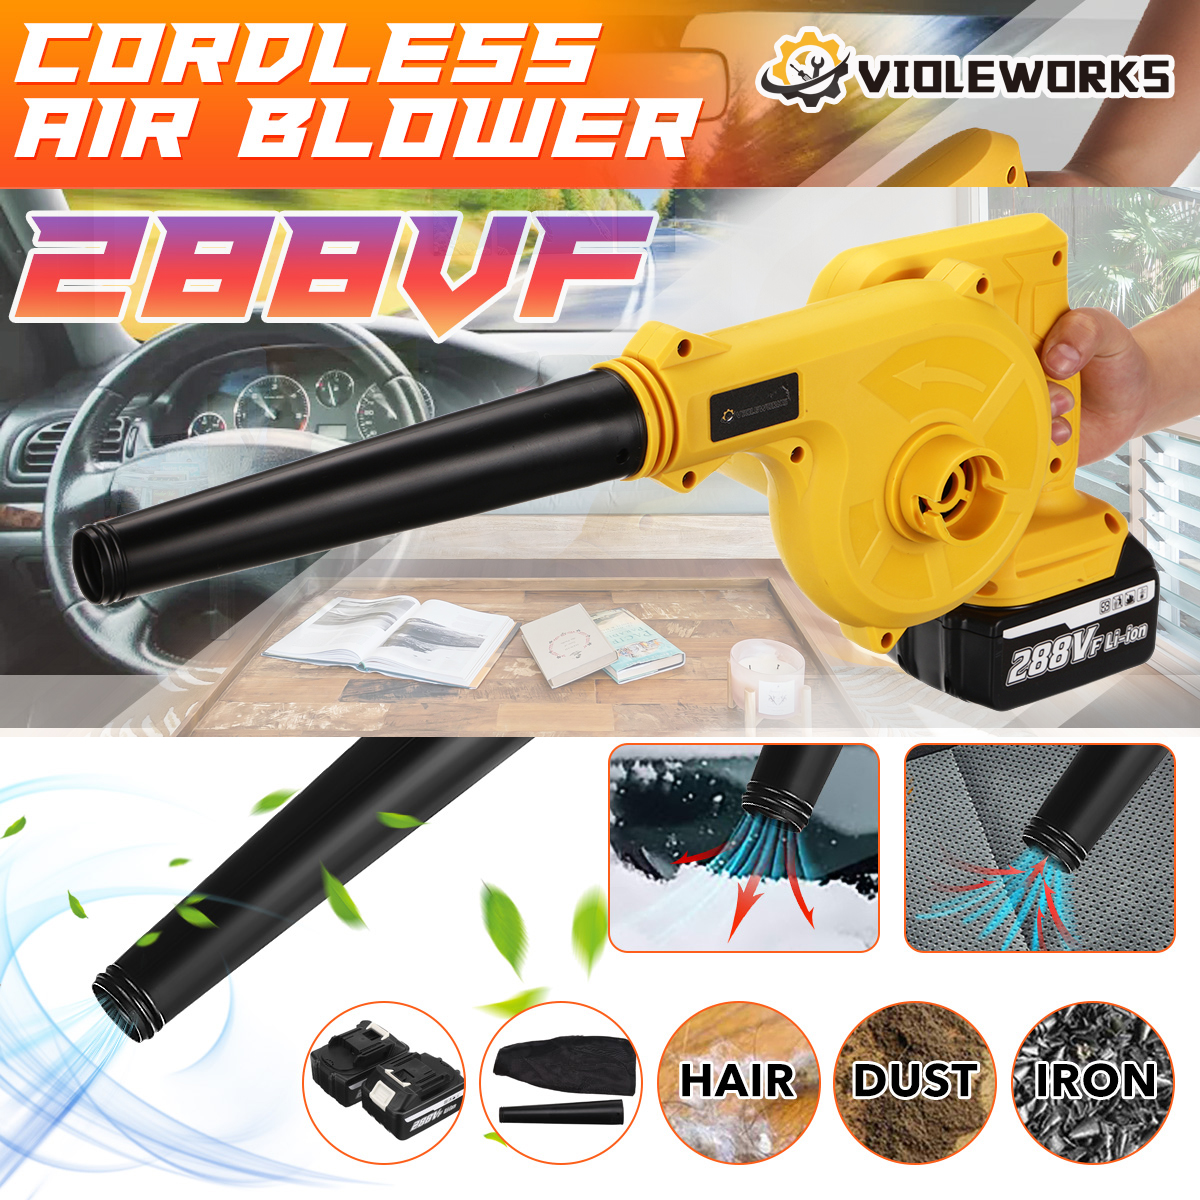 VIOLEWORKS-1500W-288VF-Cordless-Air-Blower-Rechargable-Air-Blowing-Suction-Dust-Collecting-Computer--1843546-2